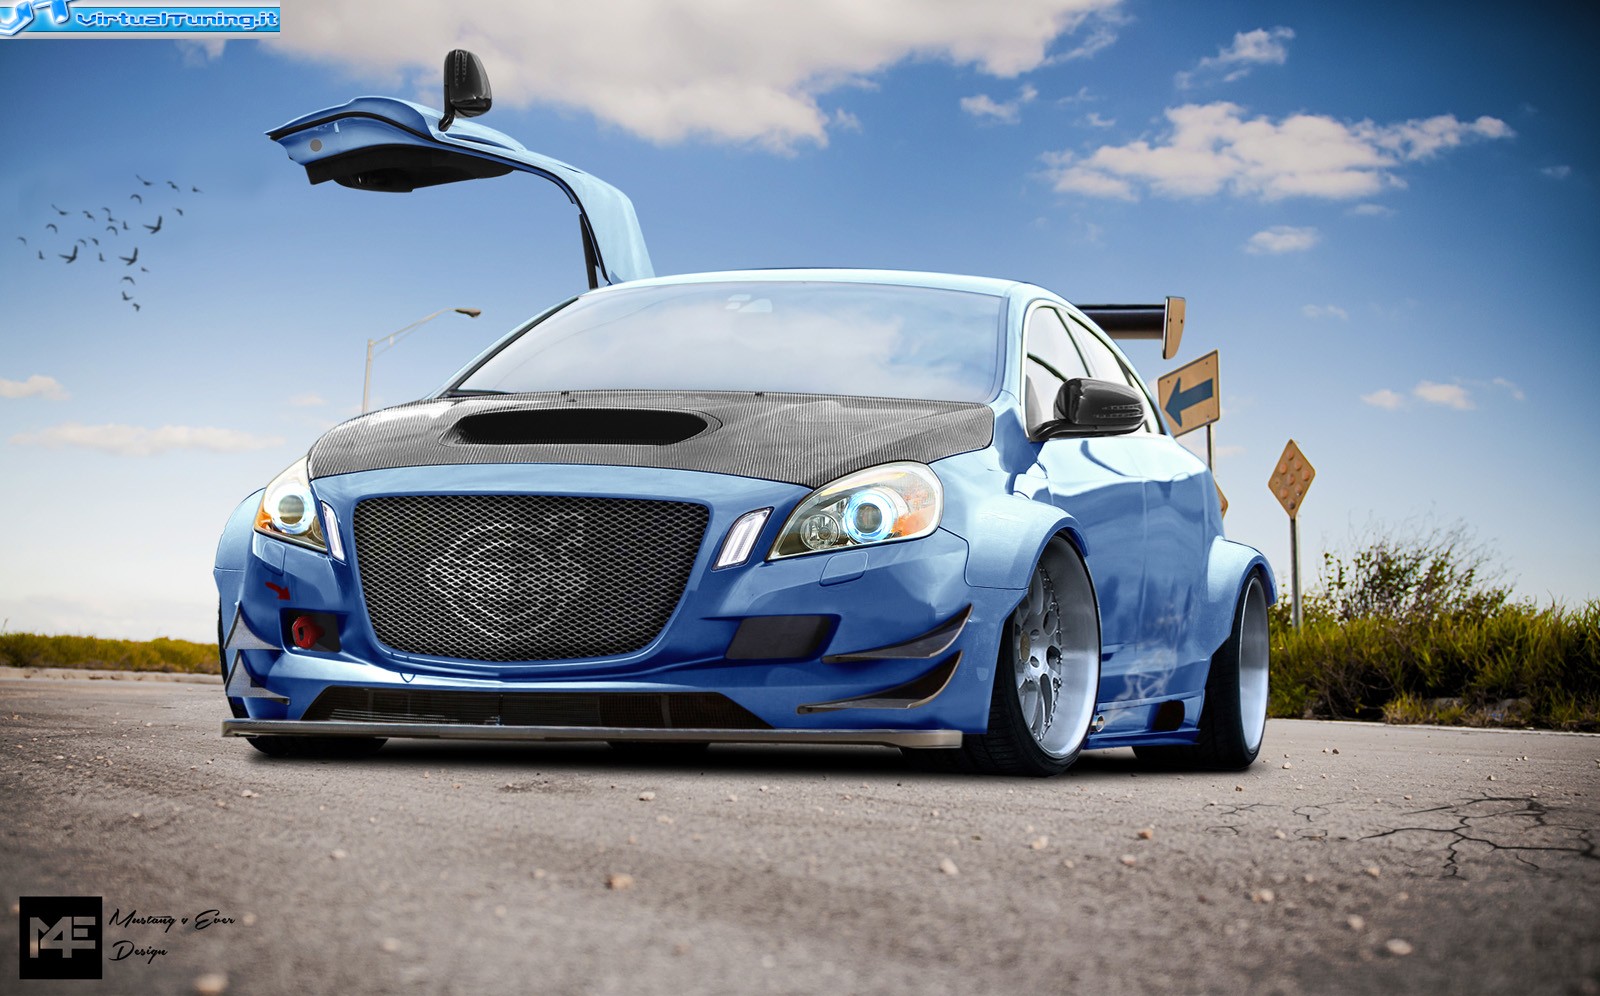 VirtualTuning VOLVO S60 by mustang 4 ever